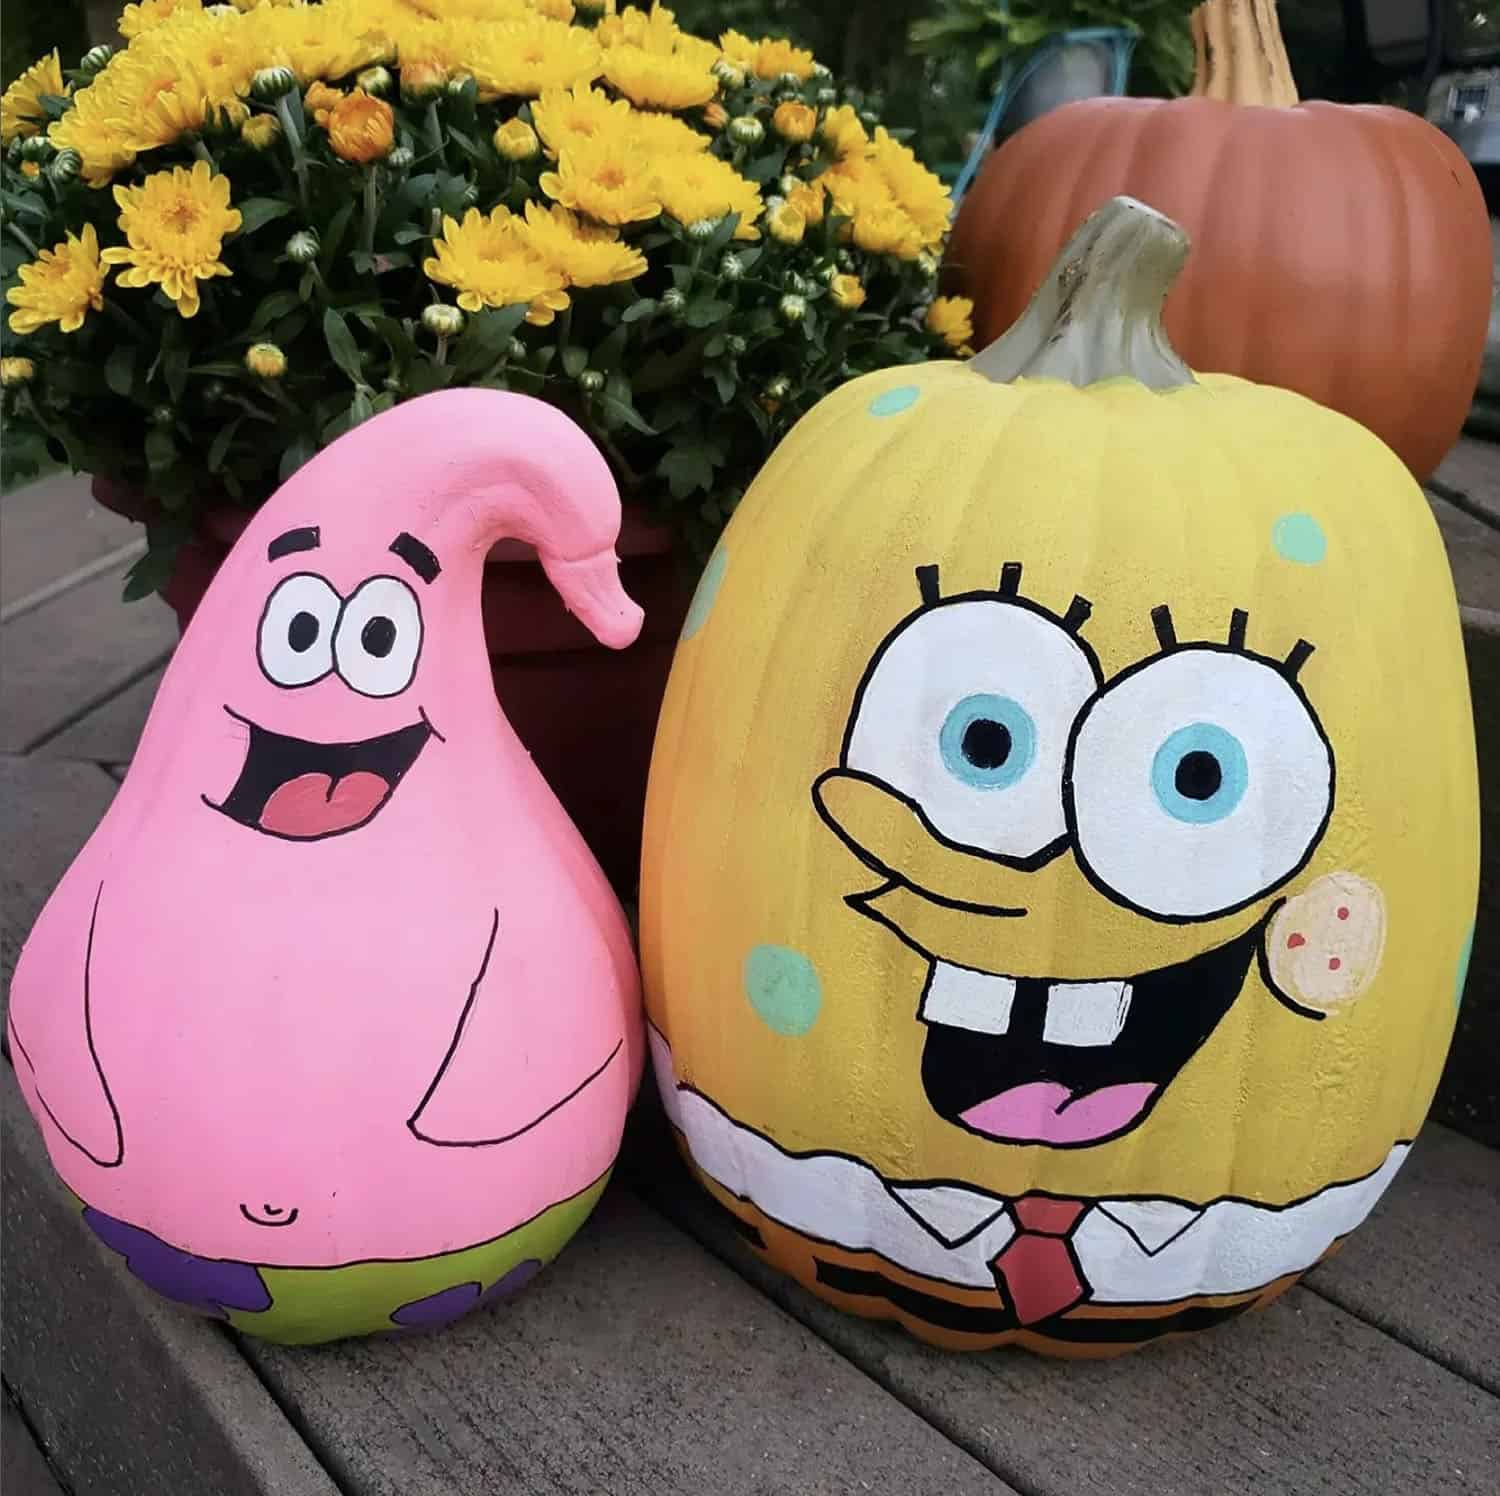 spongebob-and-gang-painted-pumpkins-and-gourds